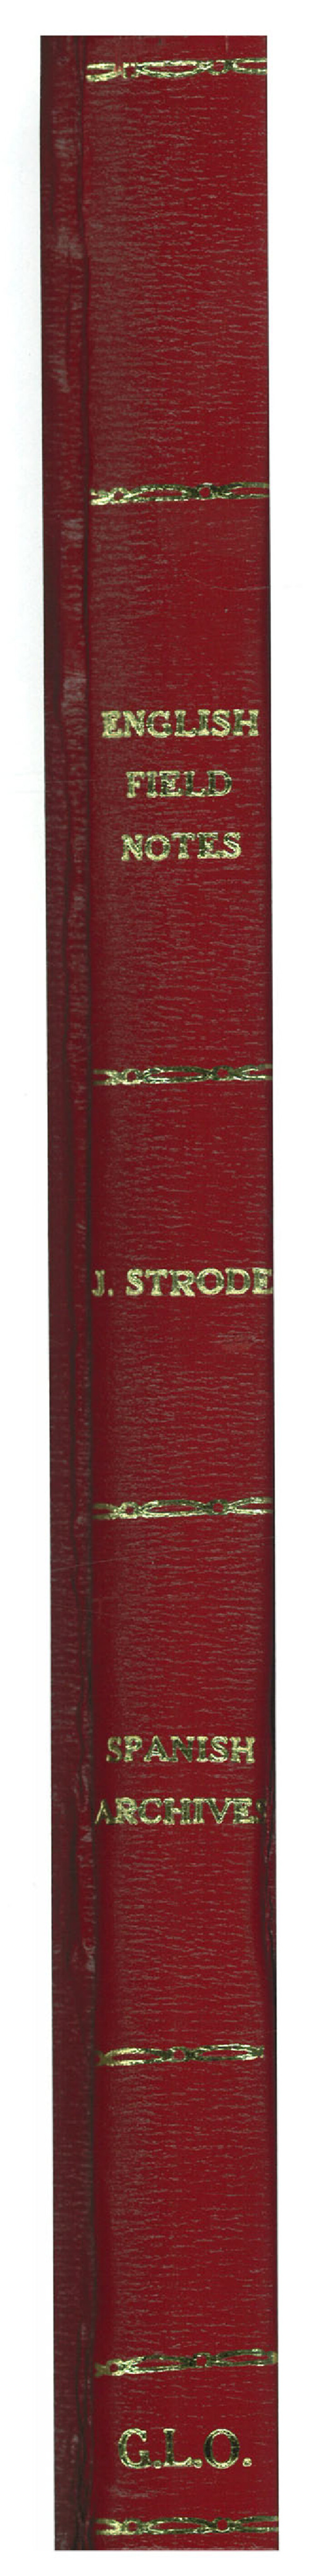 96549, English Field Notes of the Spanish Archives - Book J. Strode, Historical Volumes